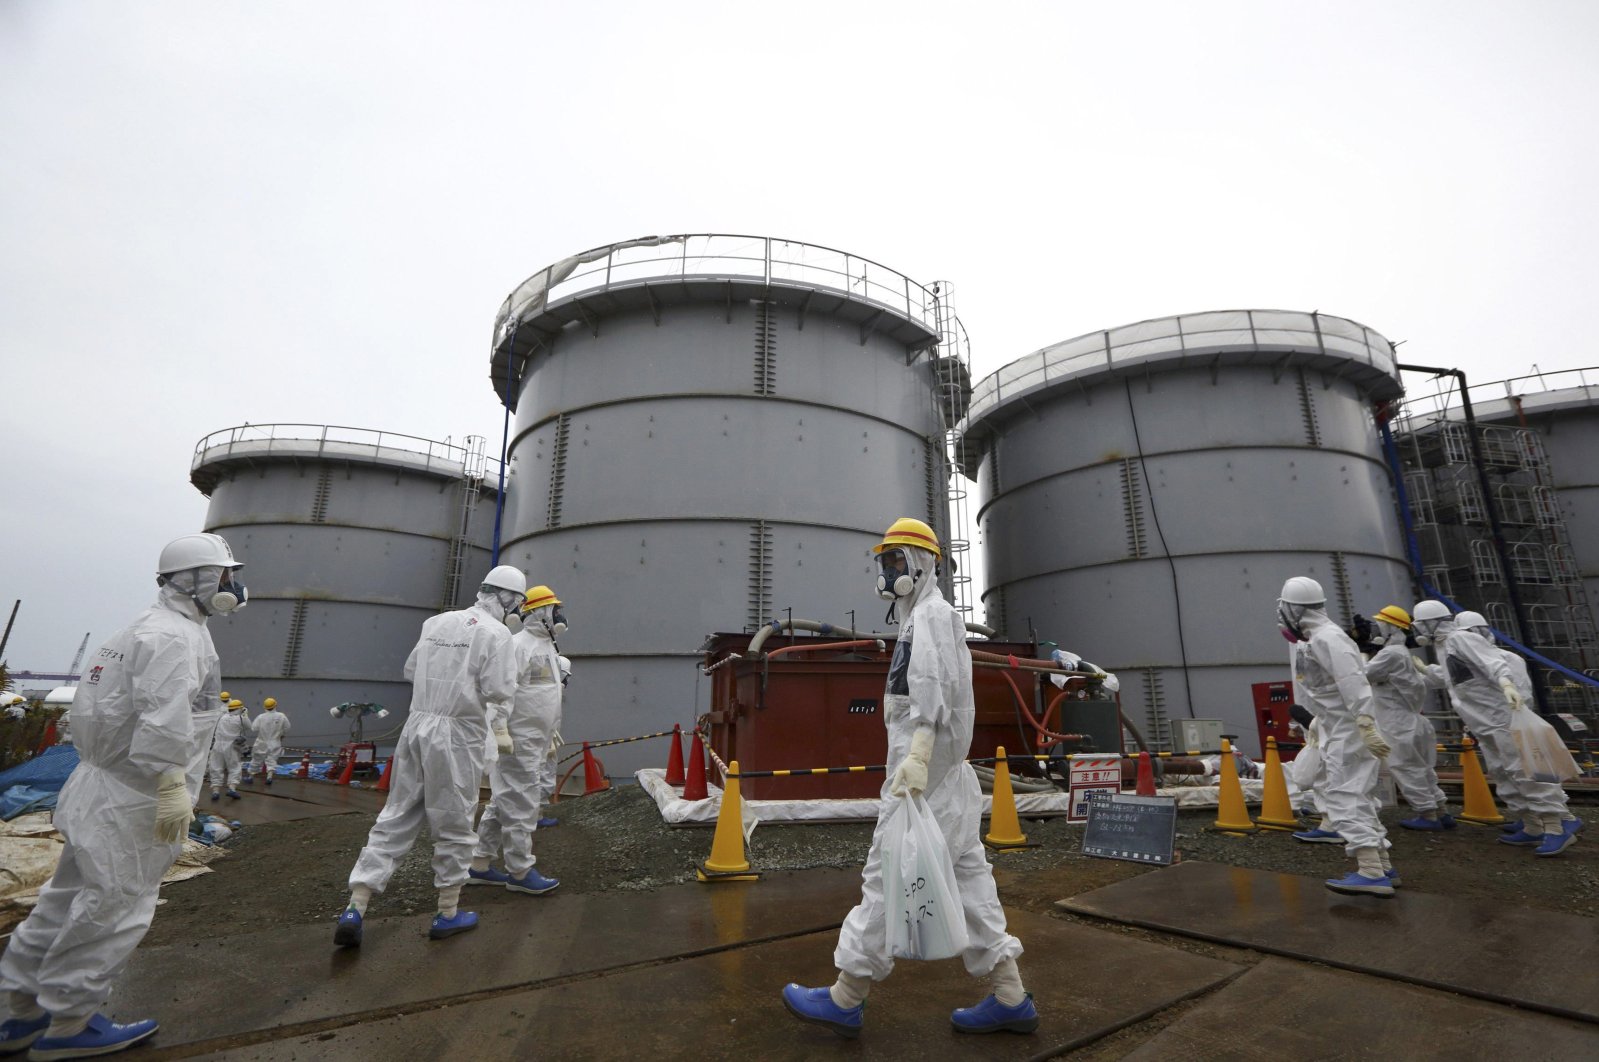 Members of the media and Tokyo Electric Power Co. (TEPCO) employees wearing protective suits and masks walk past storage tanks for radioactive water in the H4 area at the tsunami-crippled TEPCO Fukushima Daiichi nuclear power plant in Fukushima prefecture, Nov. 7, 2013. (Reuters Photo)